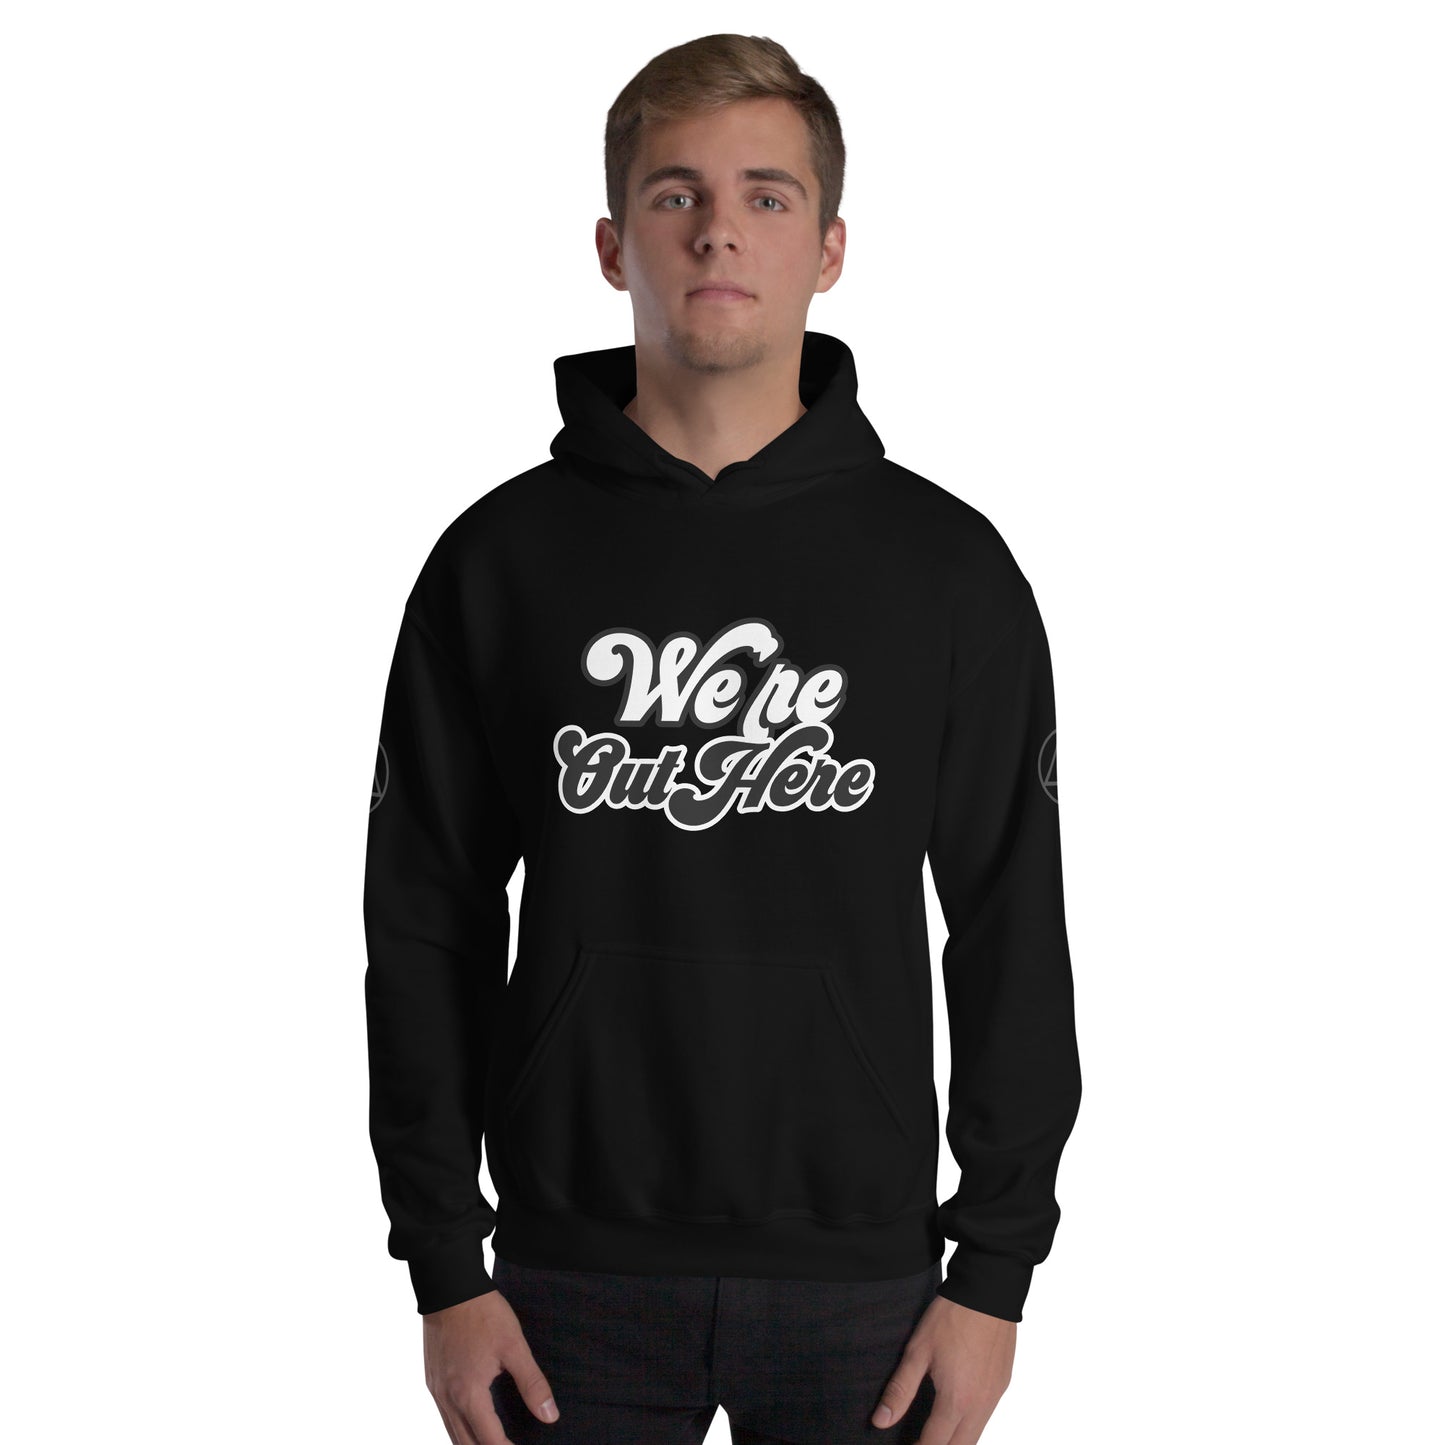 We're Out here Hoodie: Chuck's design!